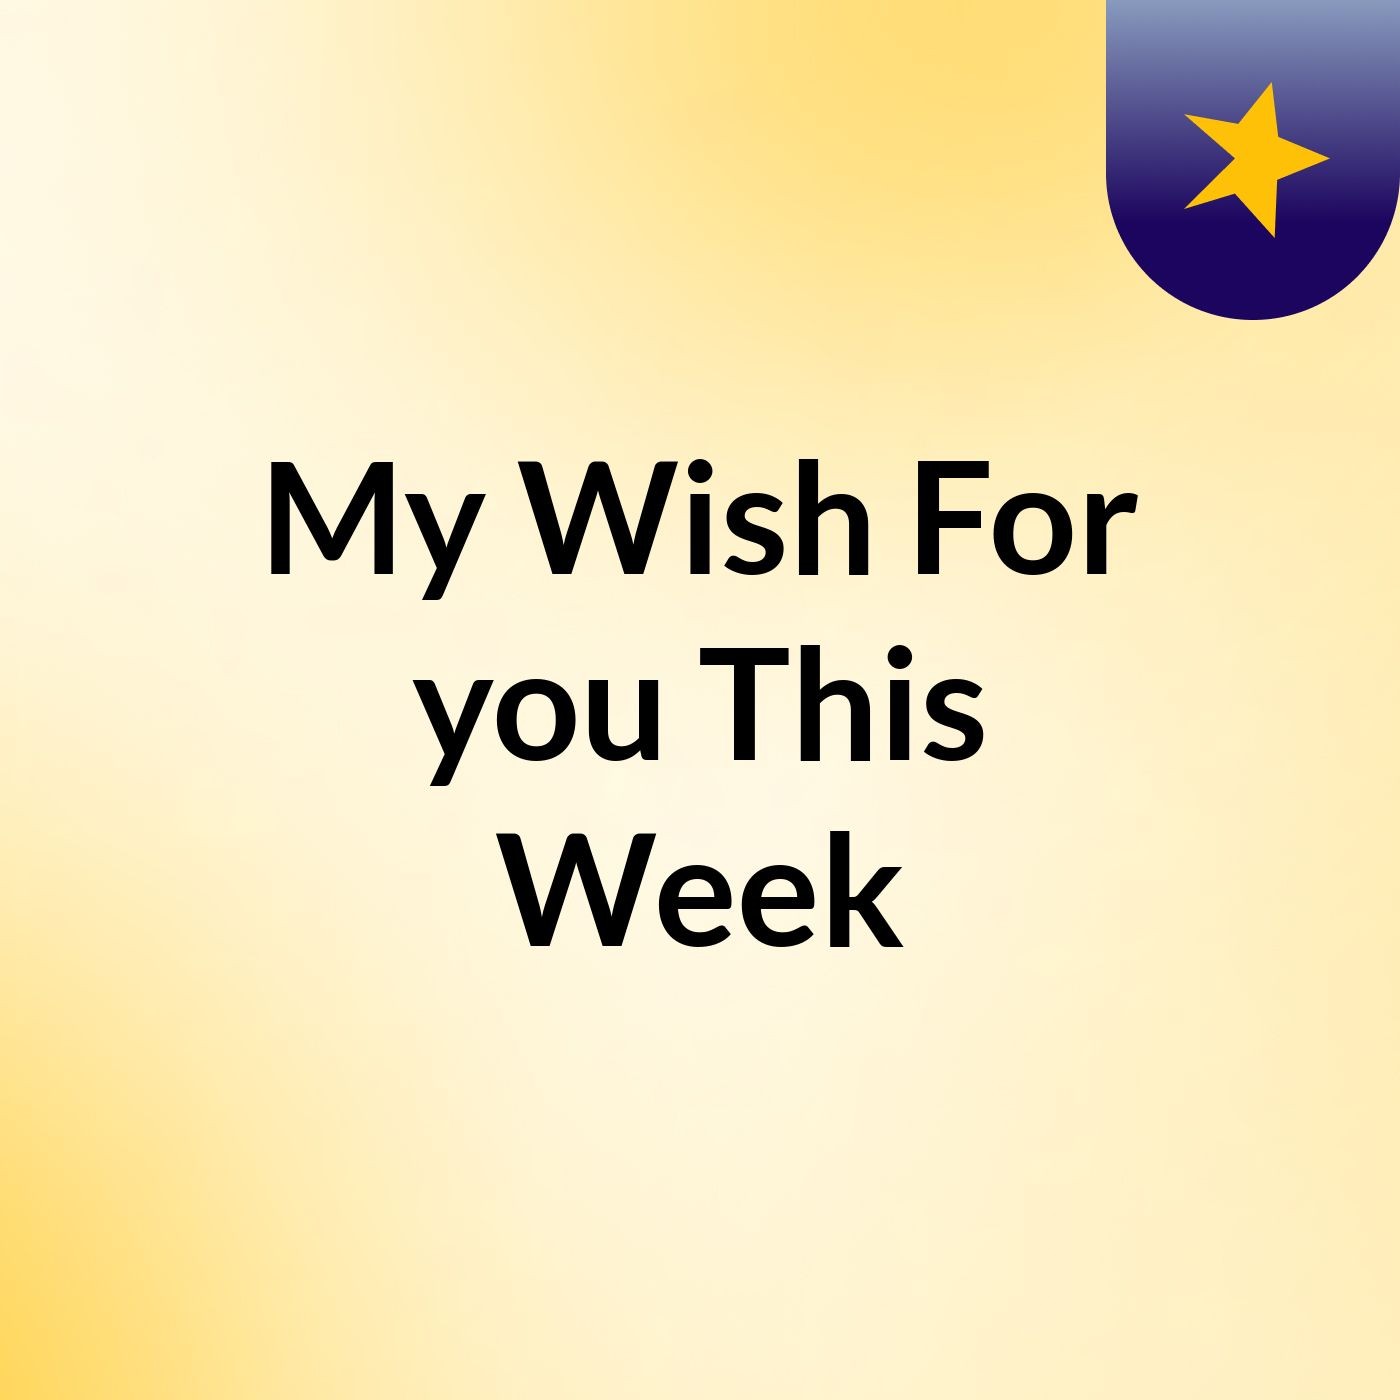 Introduction - My Wish For you This Week